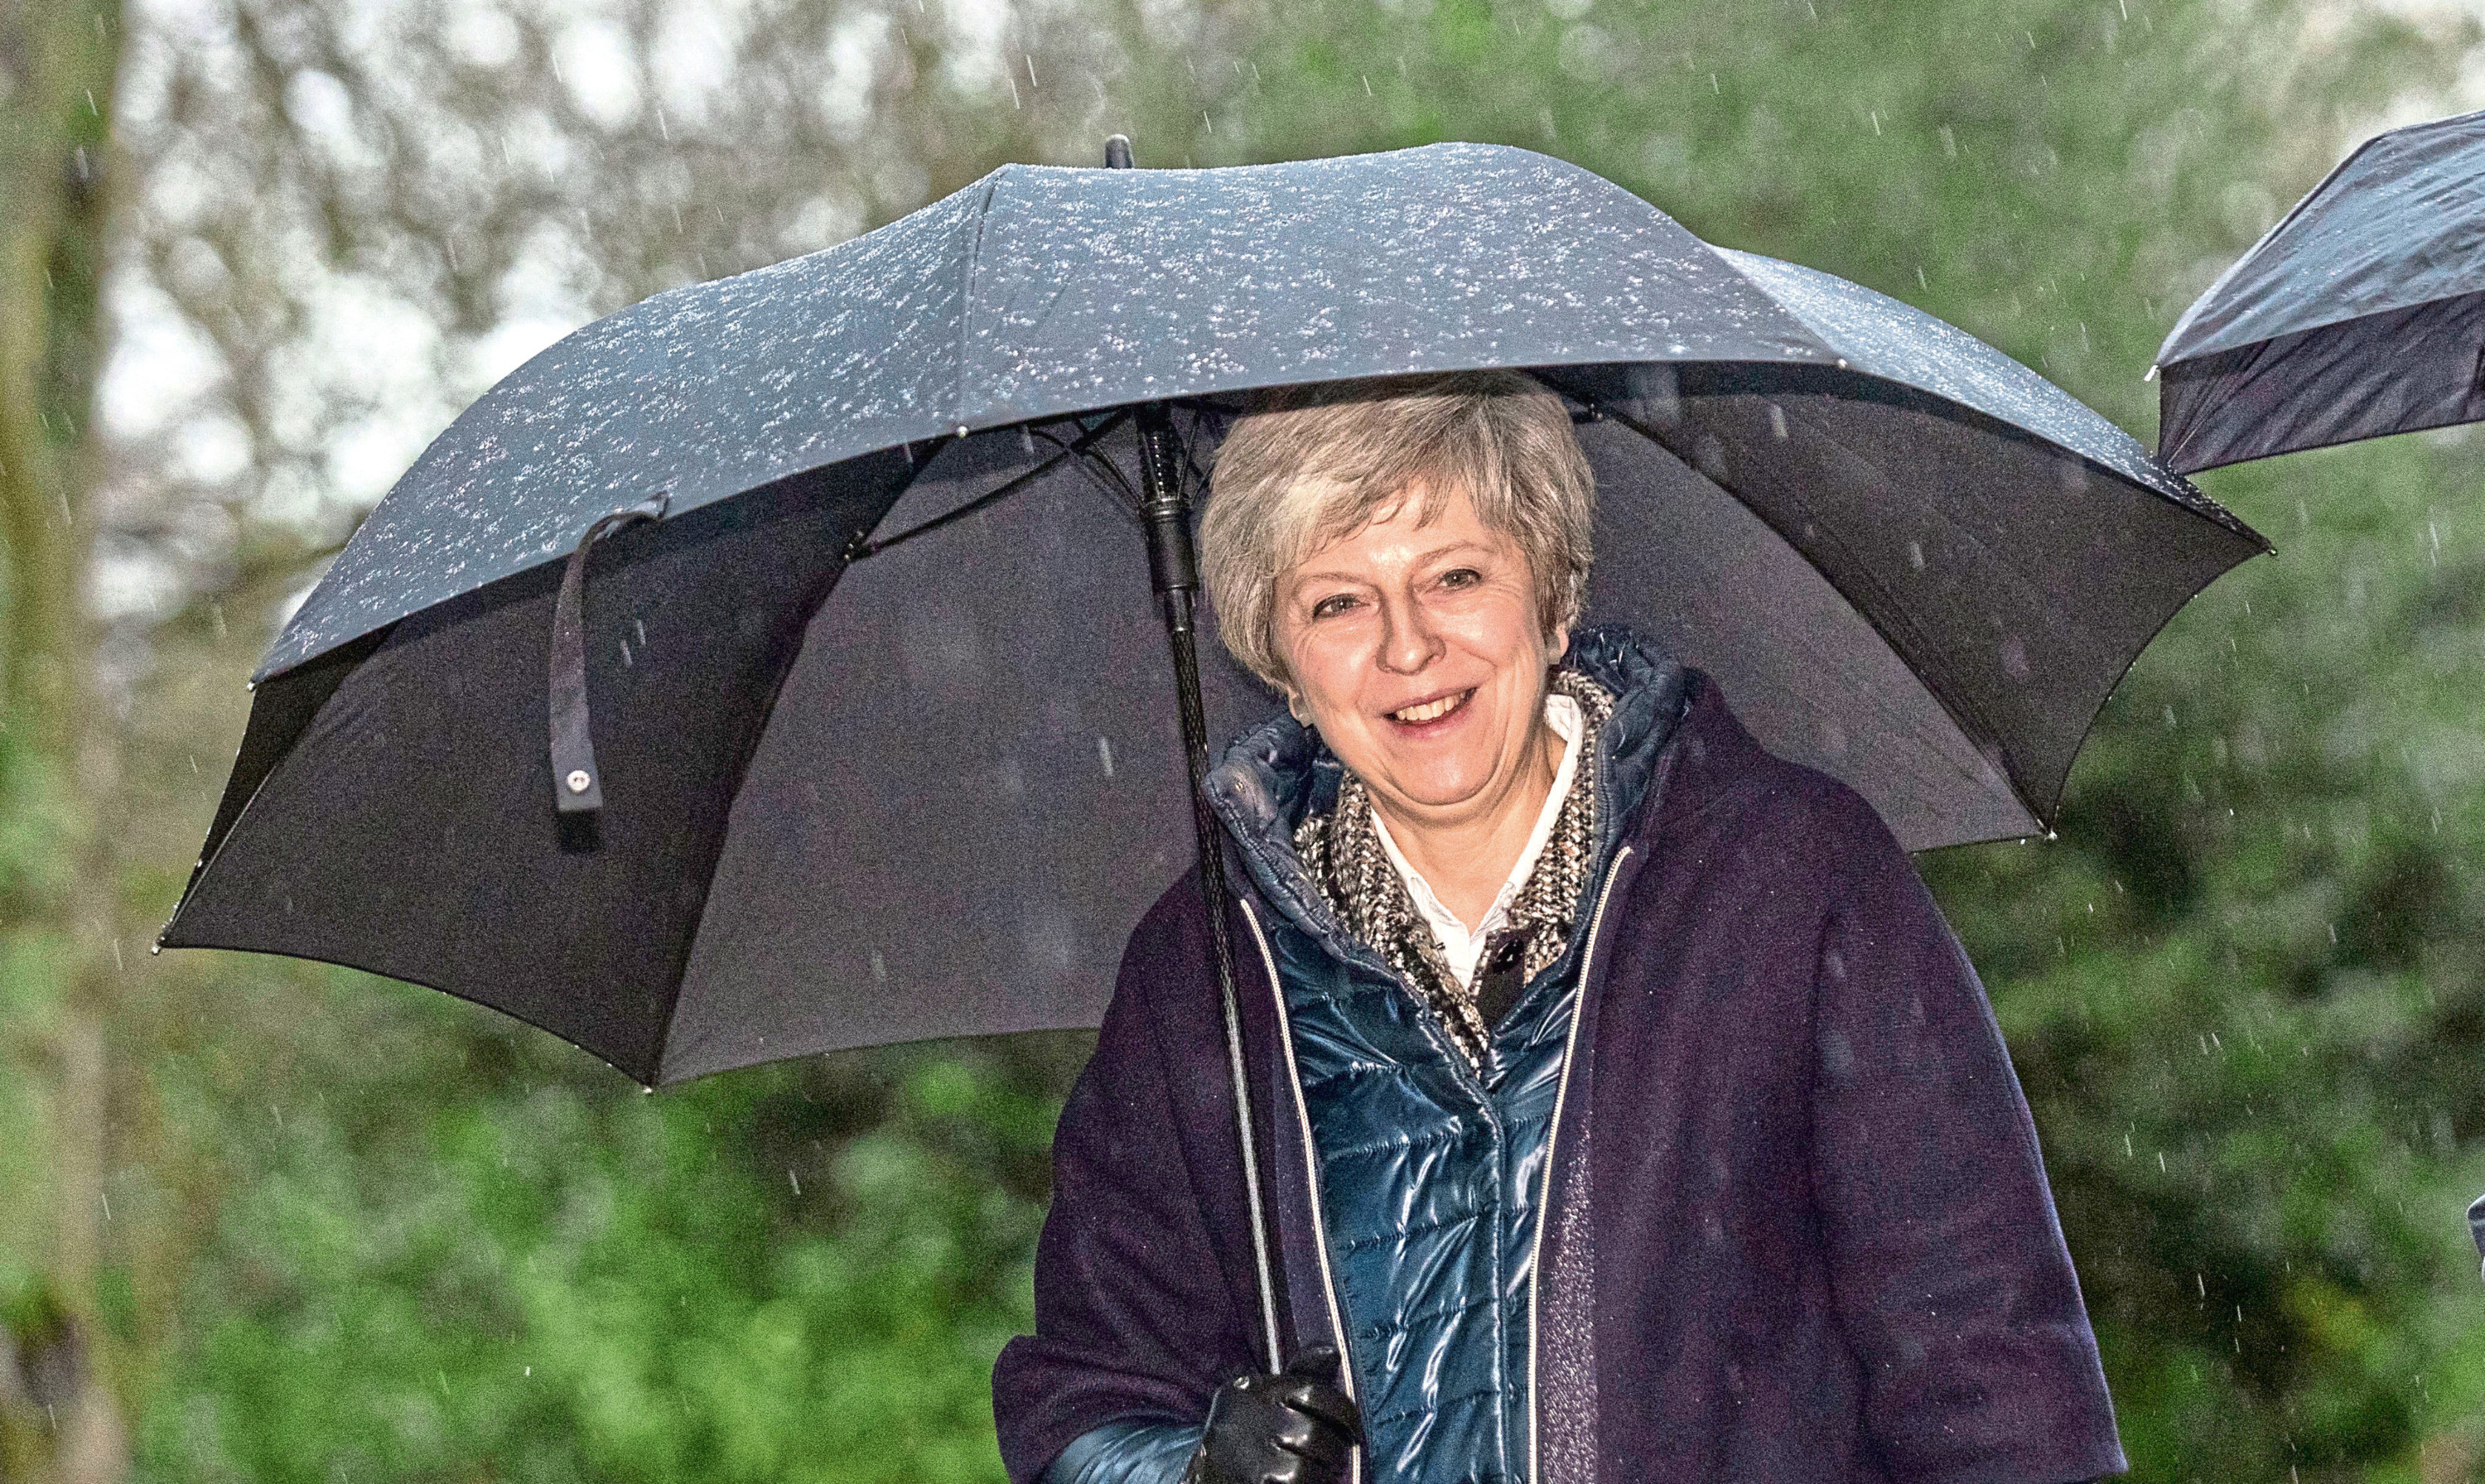 Prime Minister Theresa May shelters from the rain